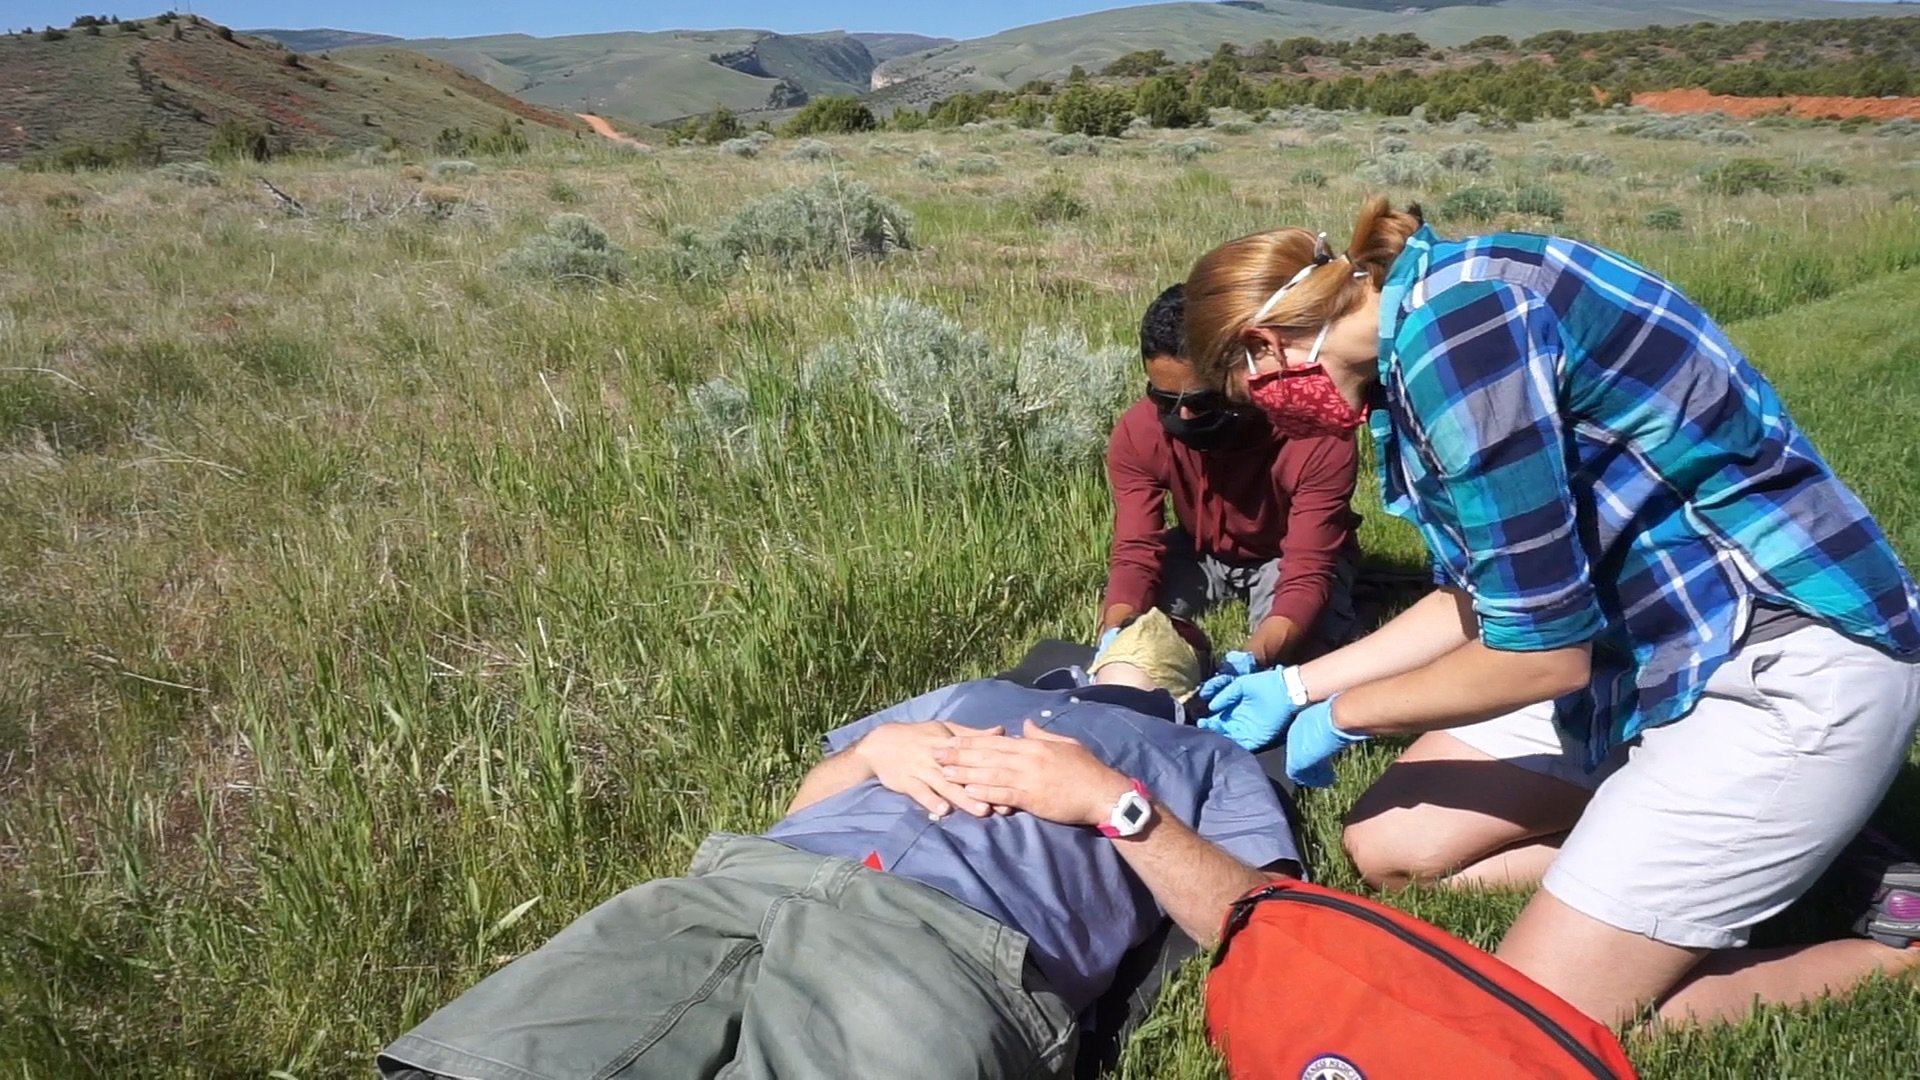 Two people practice attending to a patient in a large grassy field